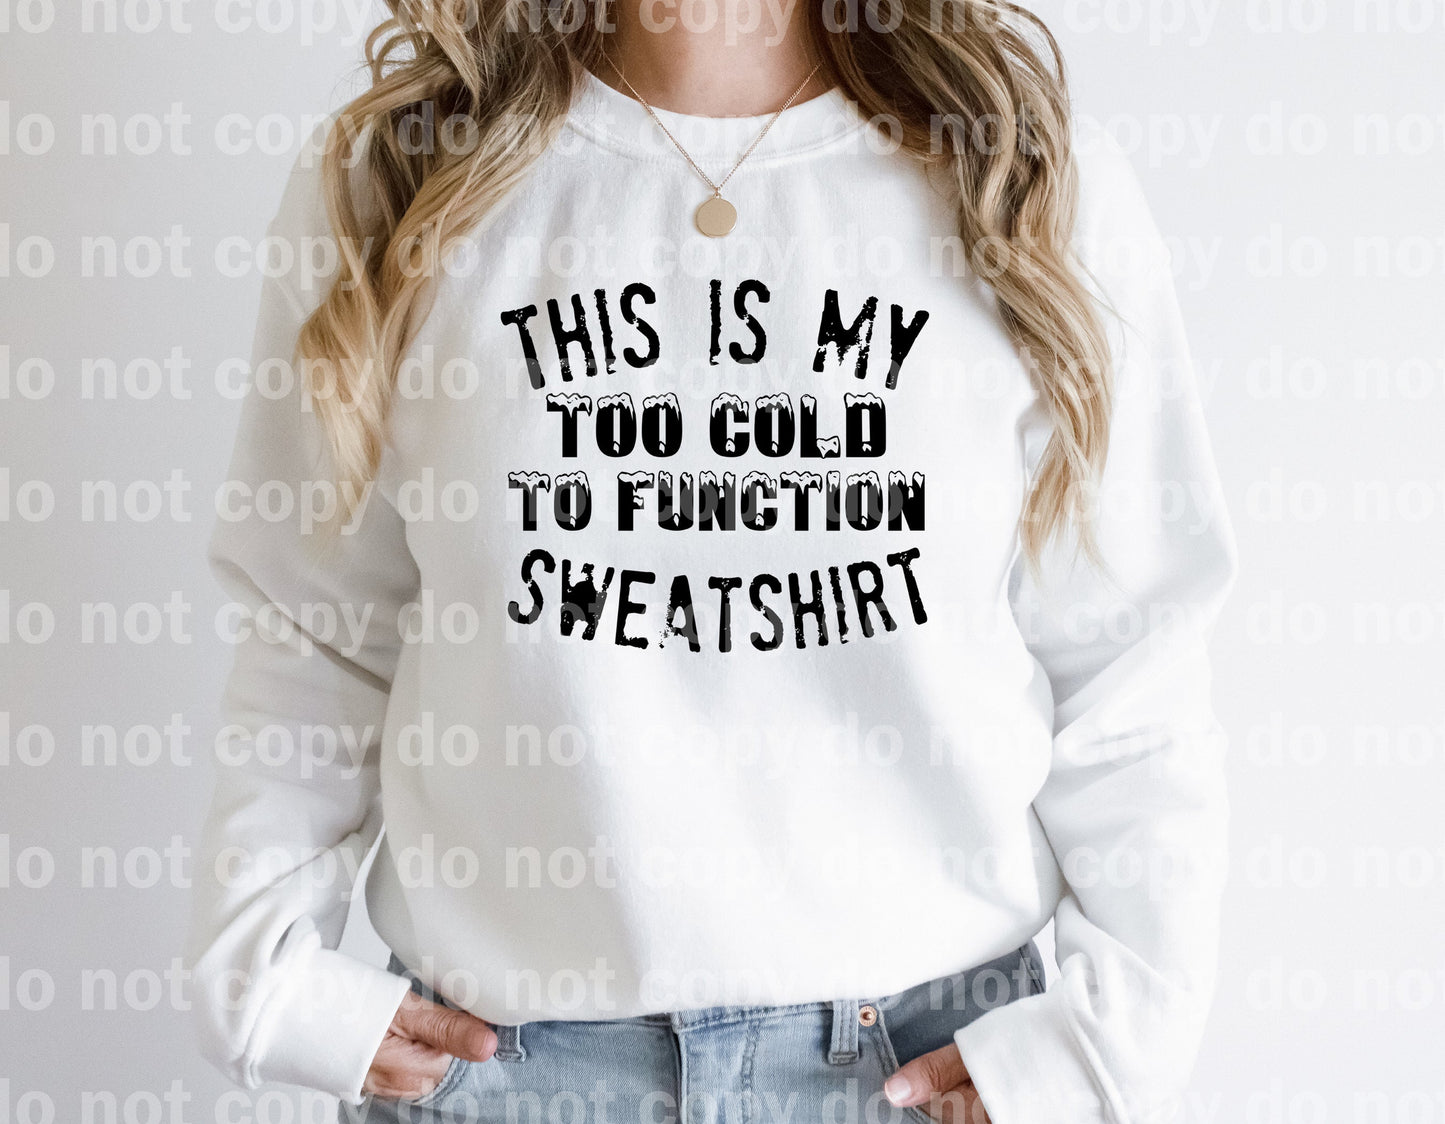 This Is My Too Cold To Function Sweatshirt Dream Print or Sublimation Print